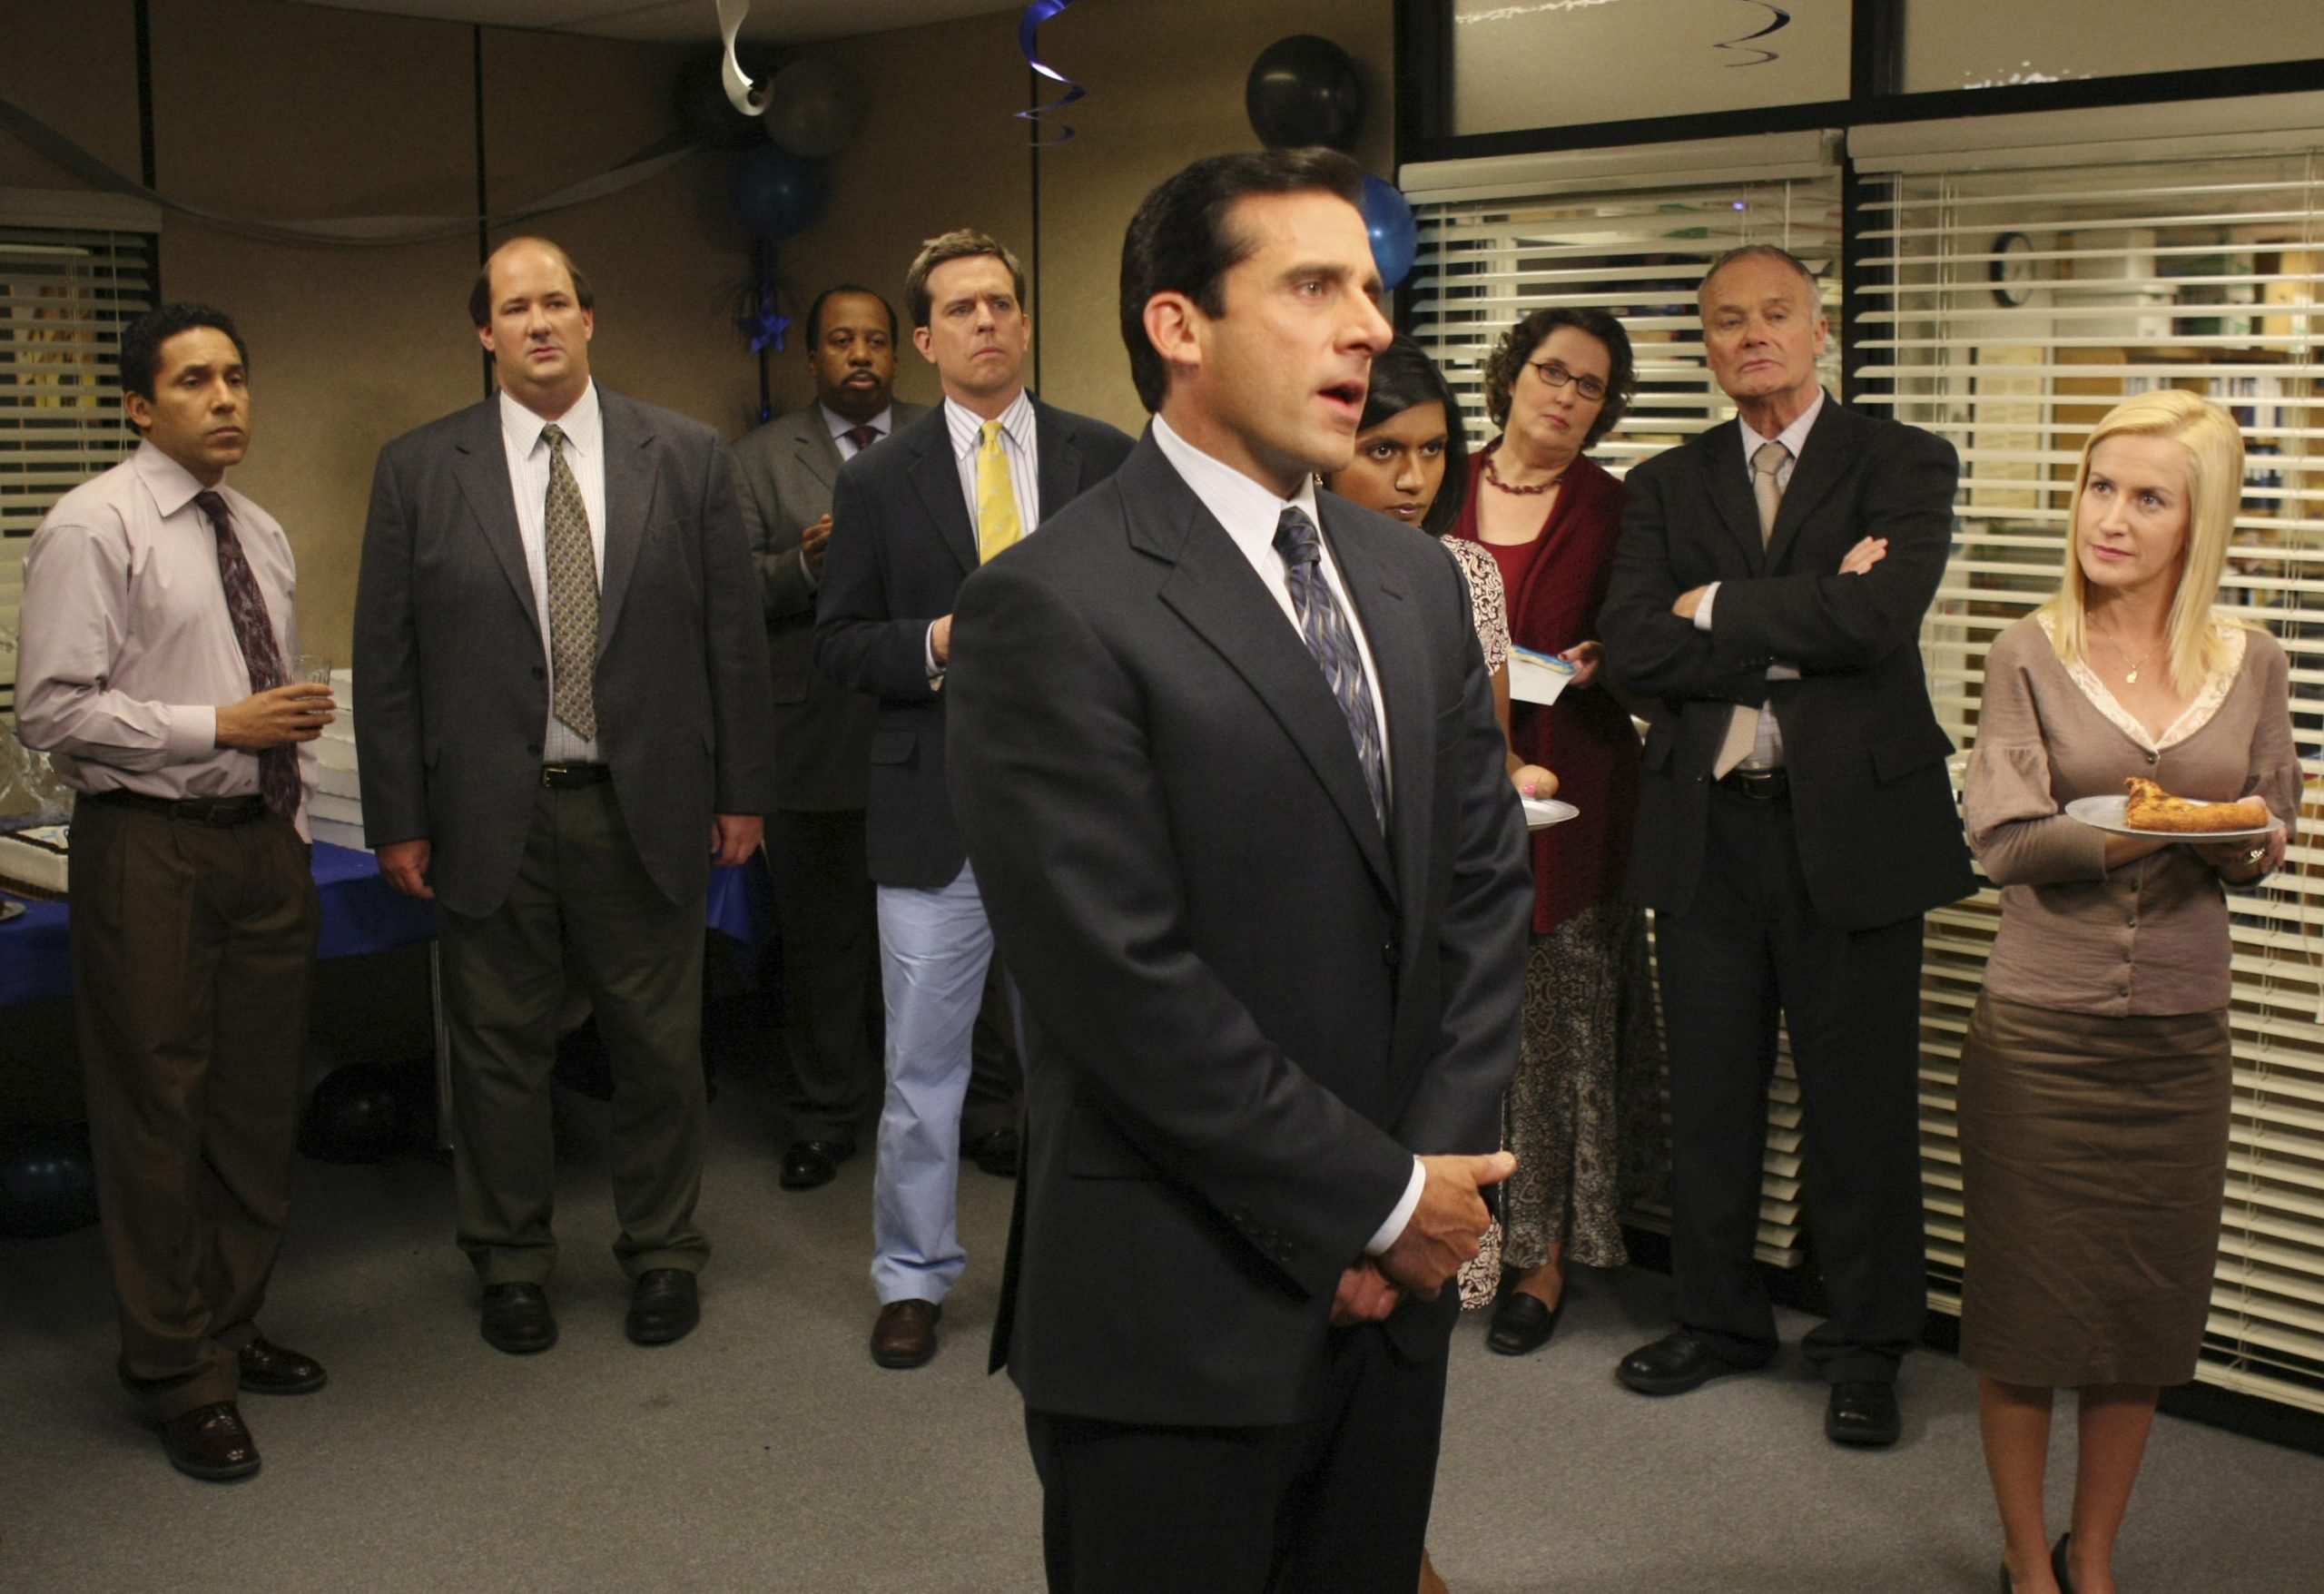 ‘The Office’ Cast and Crew Members Felt Initially ‘Intimidated’ By This Guest Star … And The Feeling Was Mutual